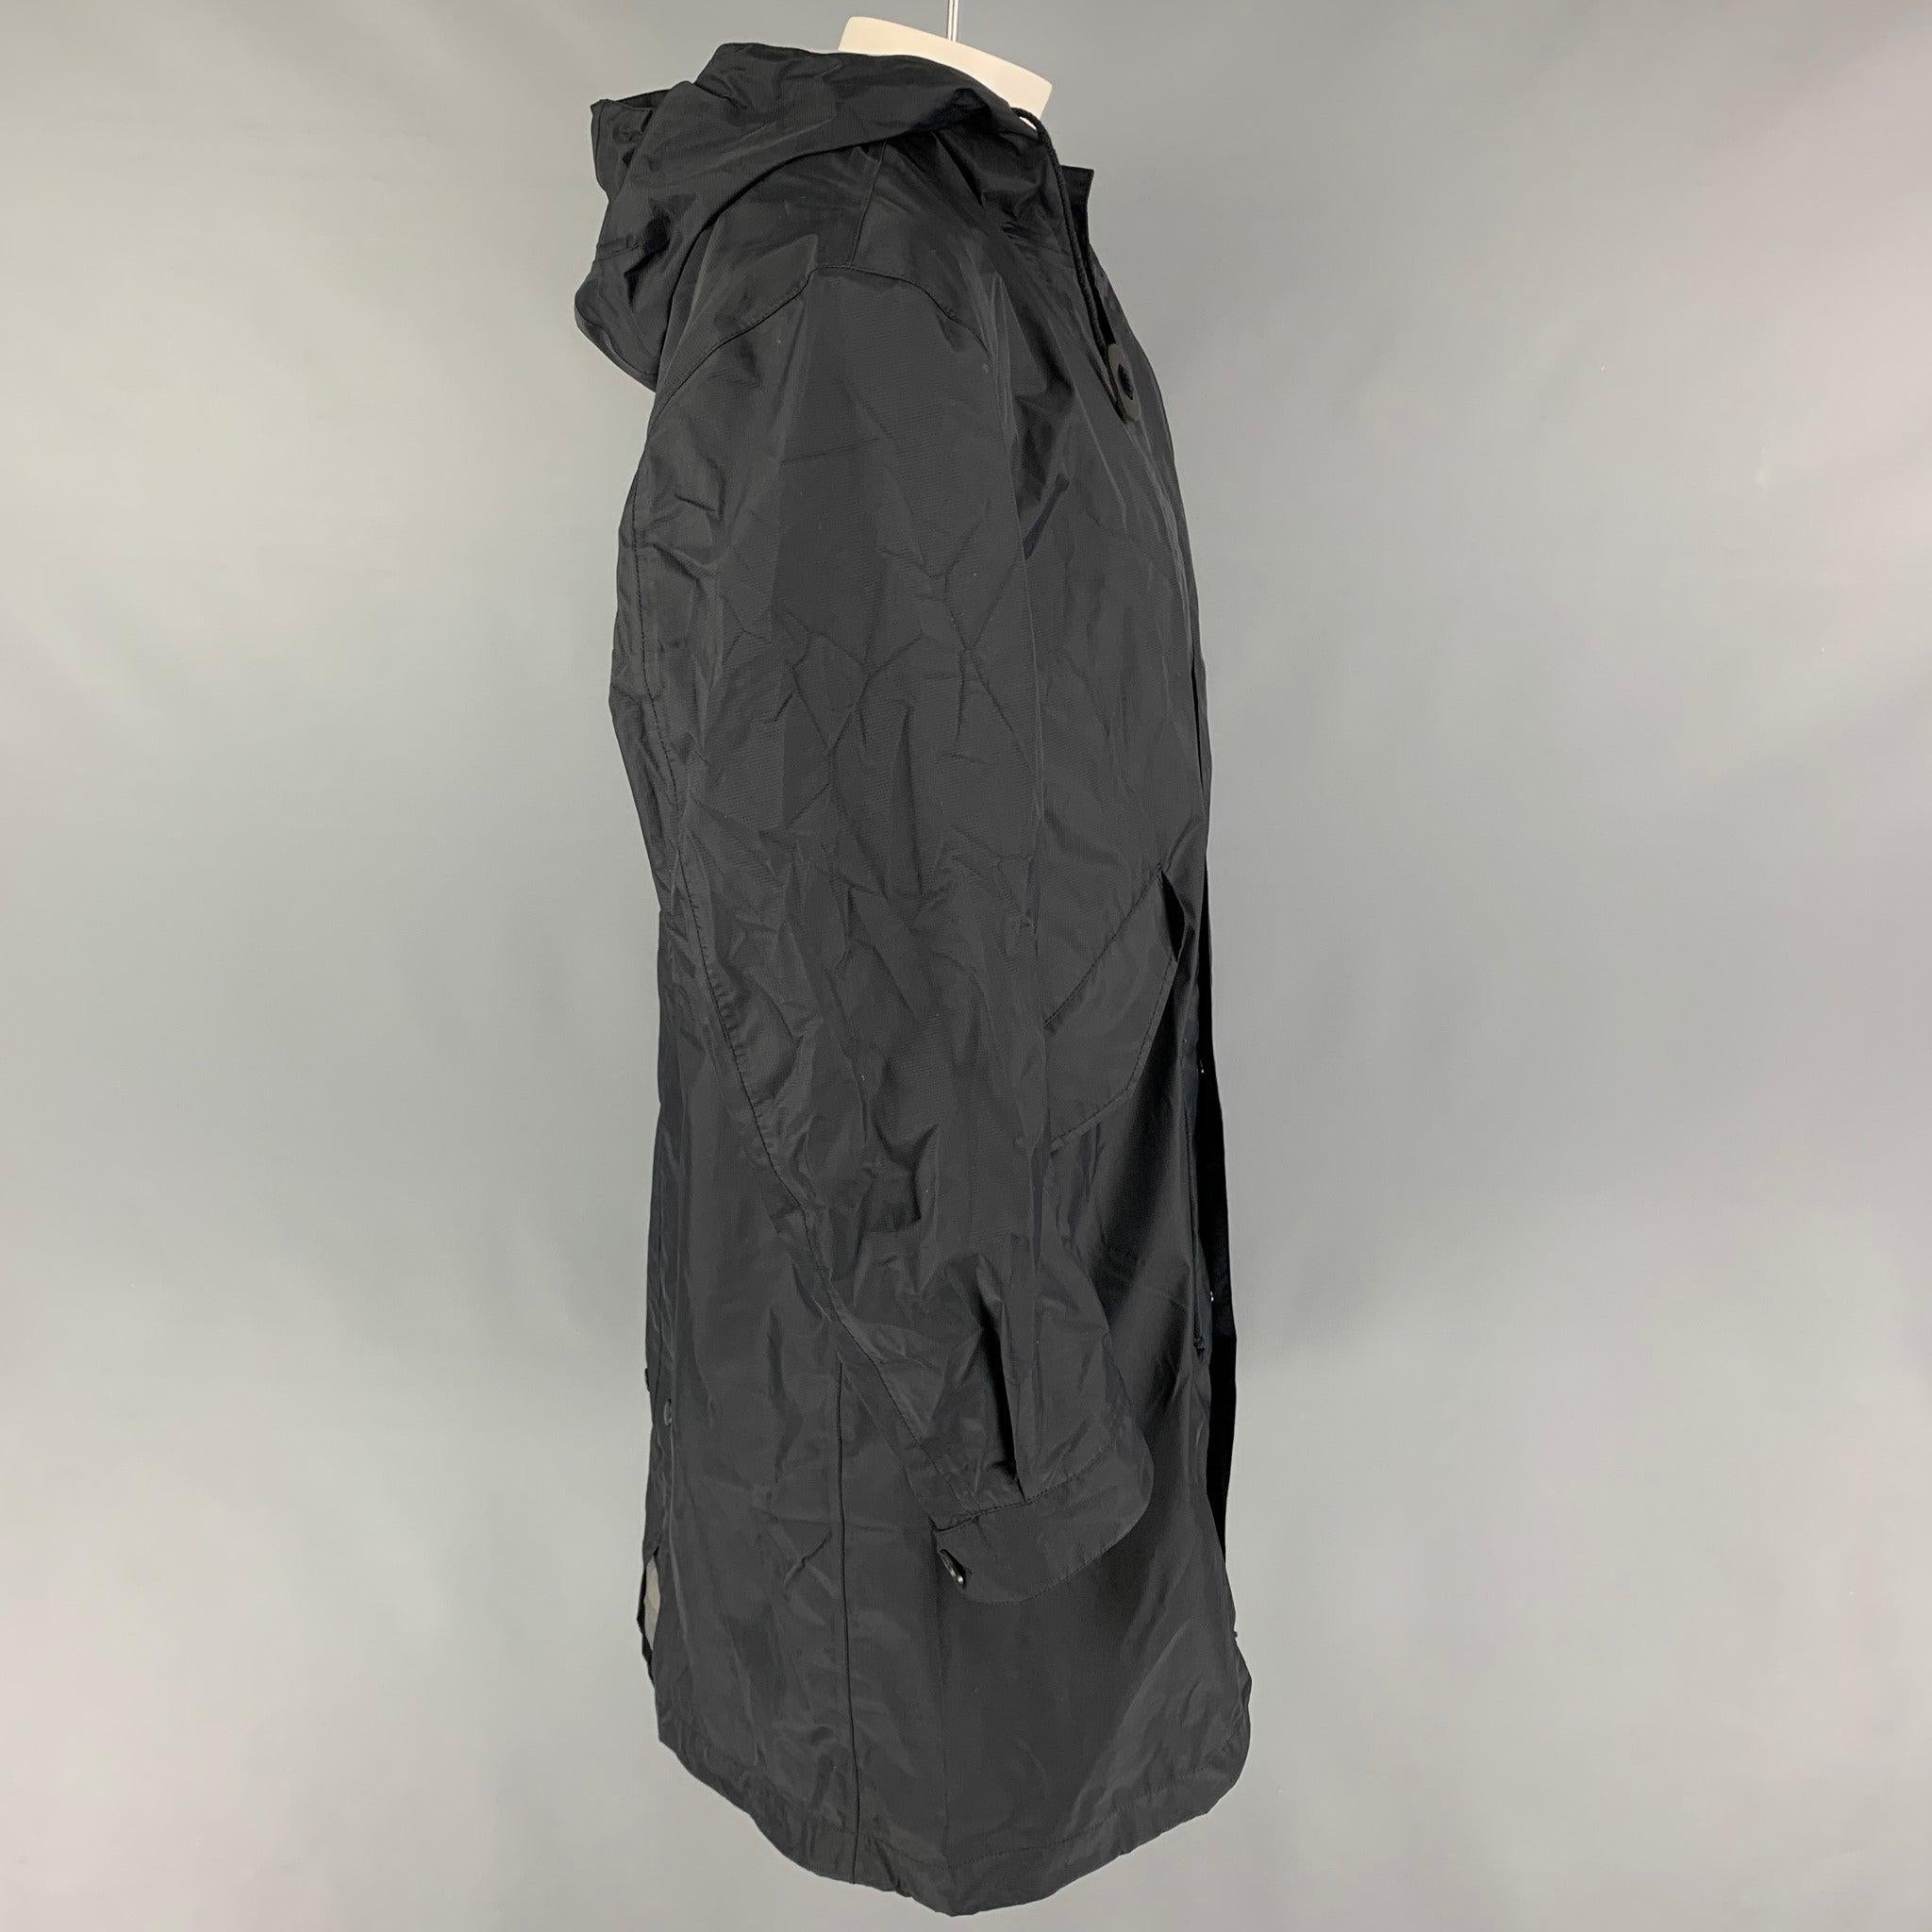 JUNYA WATANABE eYe coat comes in a black nylon with GORE-TEX technology featuring a hooded style, flap pockets, leather trim, and a hidden zip & snap button closure.
Very Good
Pre-Owned Condition. 

Marked:  M / AD2016 

Measurements: 
